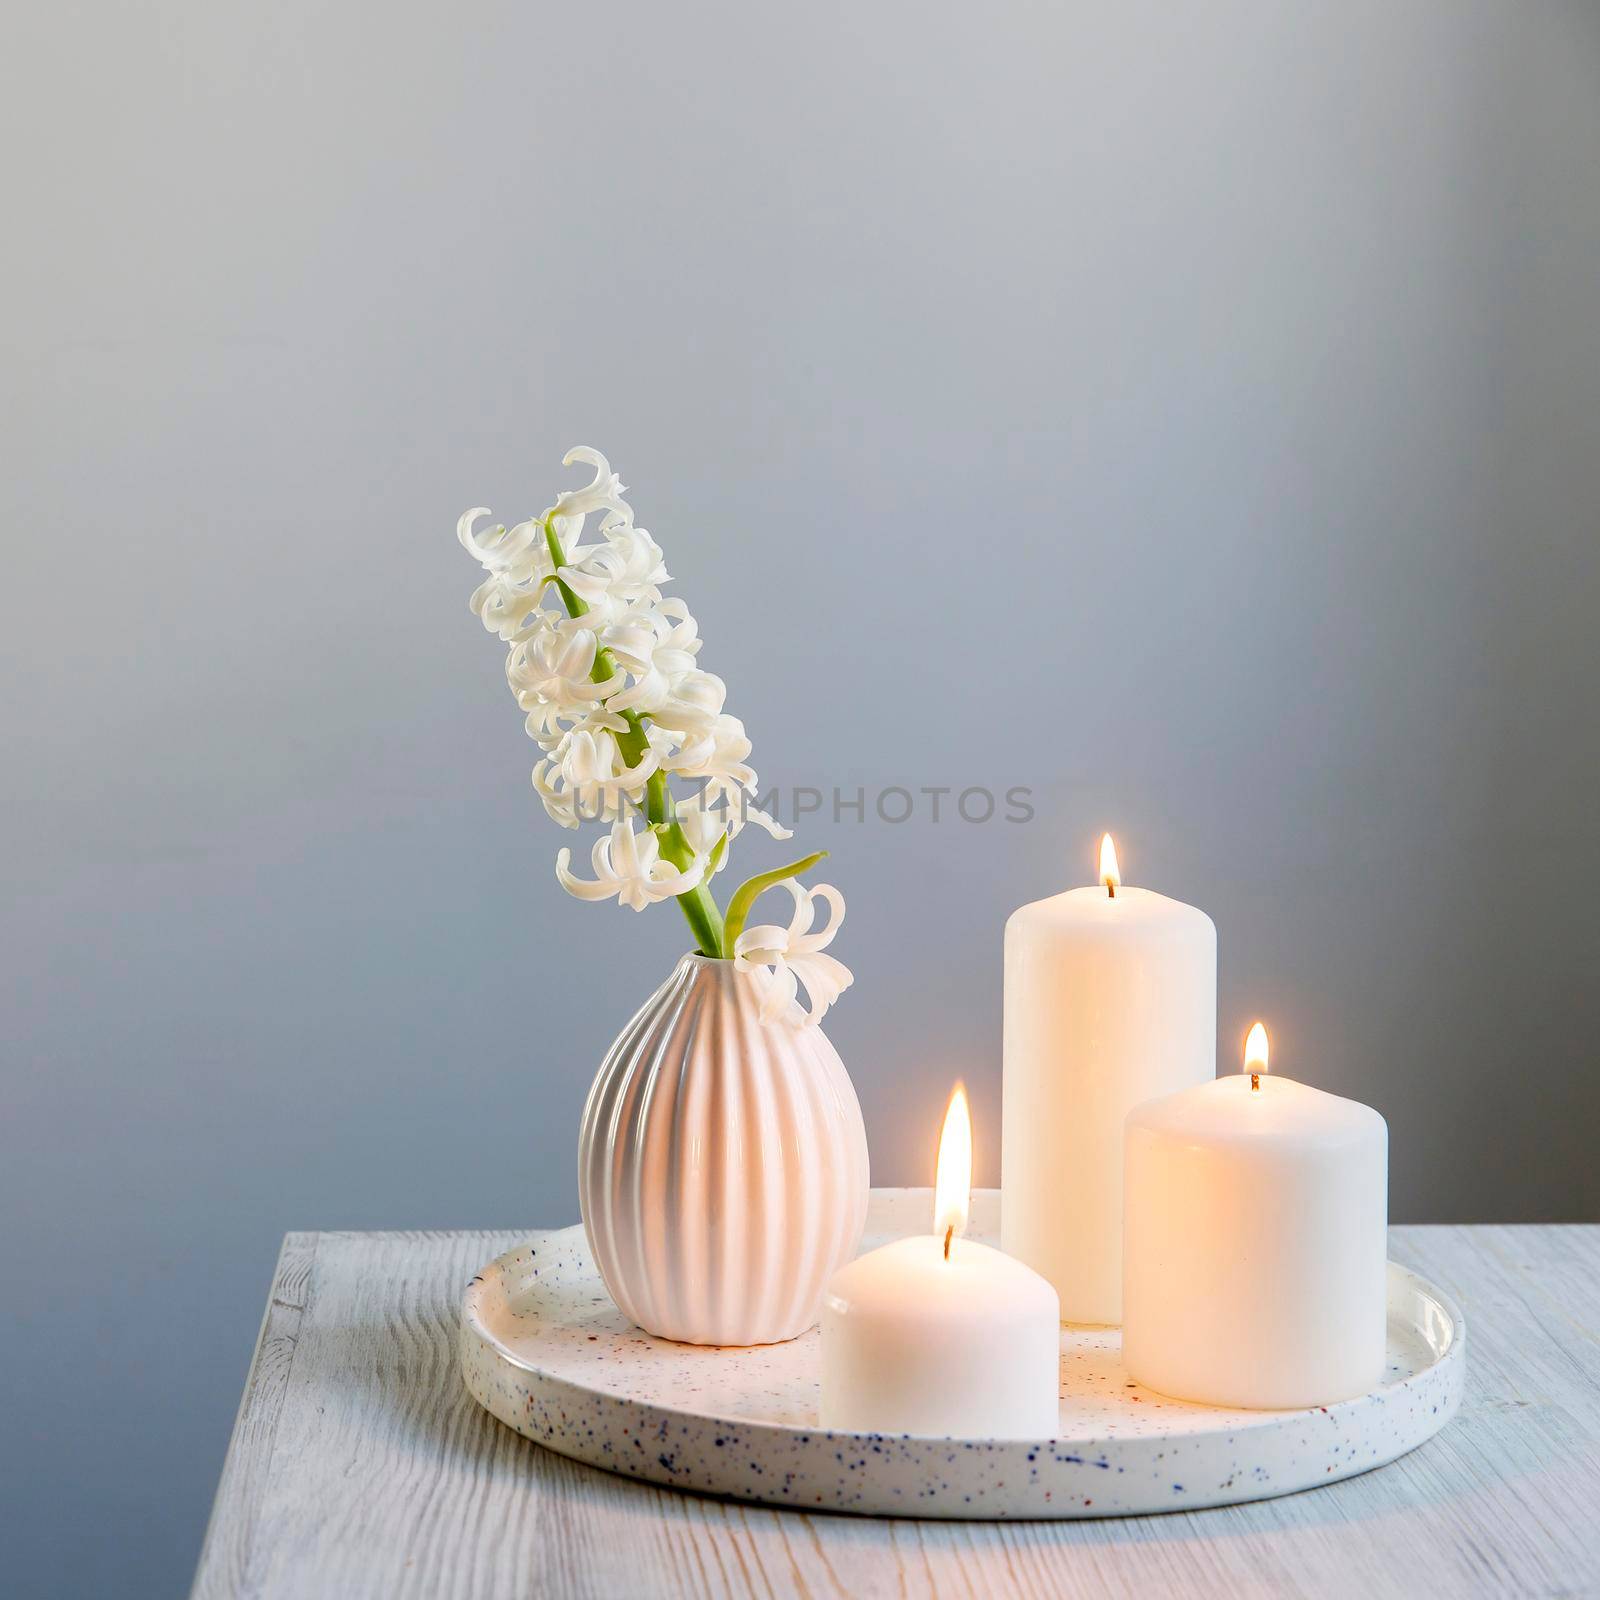 A bouquet of white cut hyacinth a in a small white corrugated vase and three large burning candles on a round tray are on a beige table. Place for text by elenarostunova